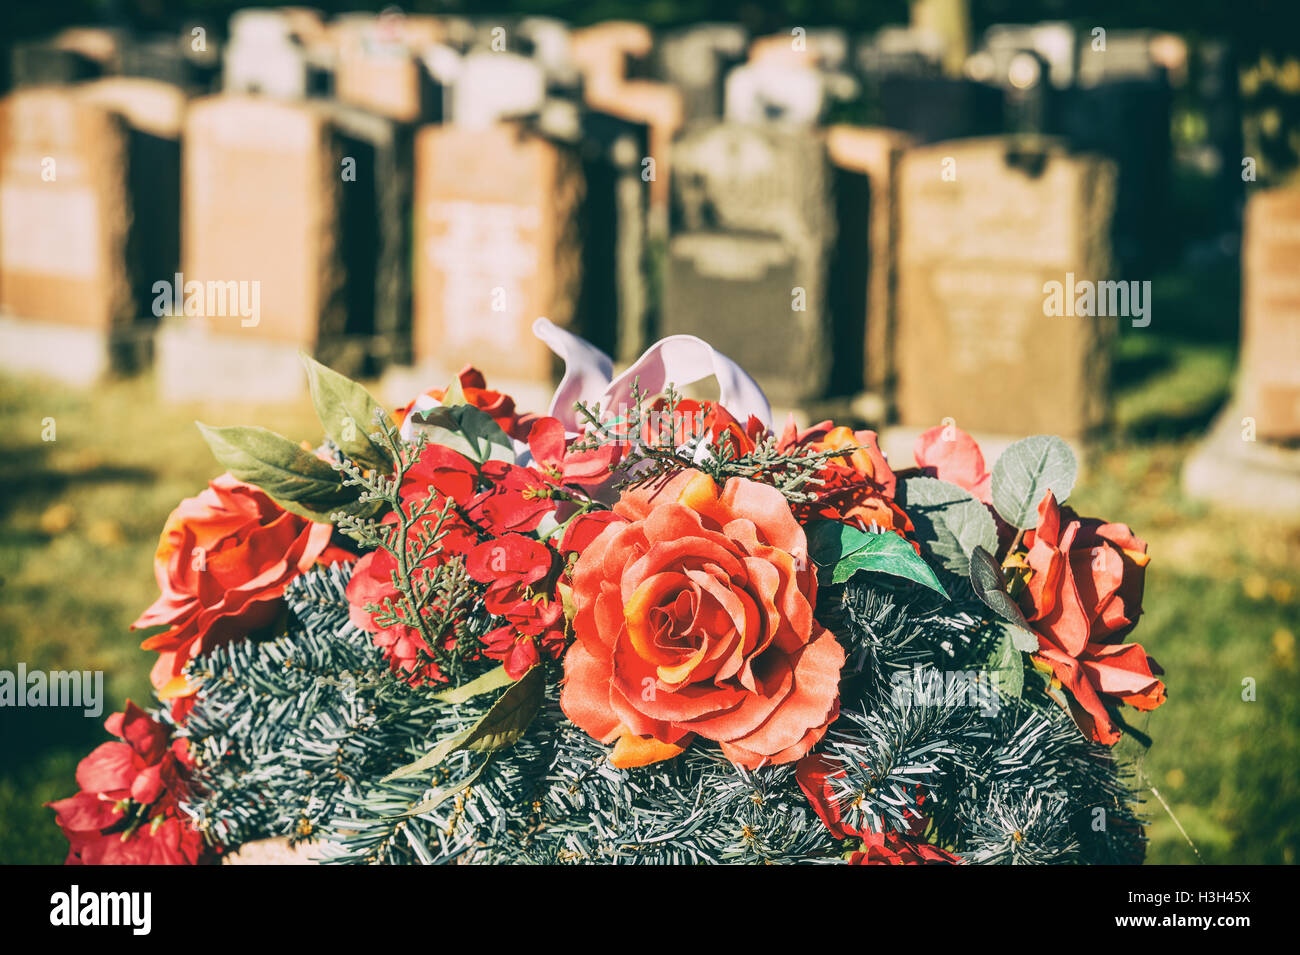 Roses in a cemetery with headstones in the background (faded retro effect) Stock Photo